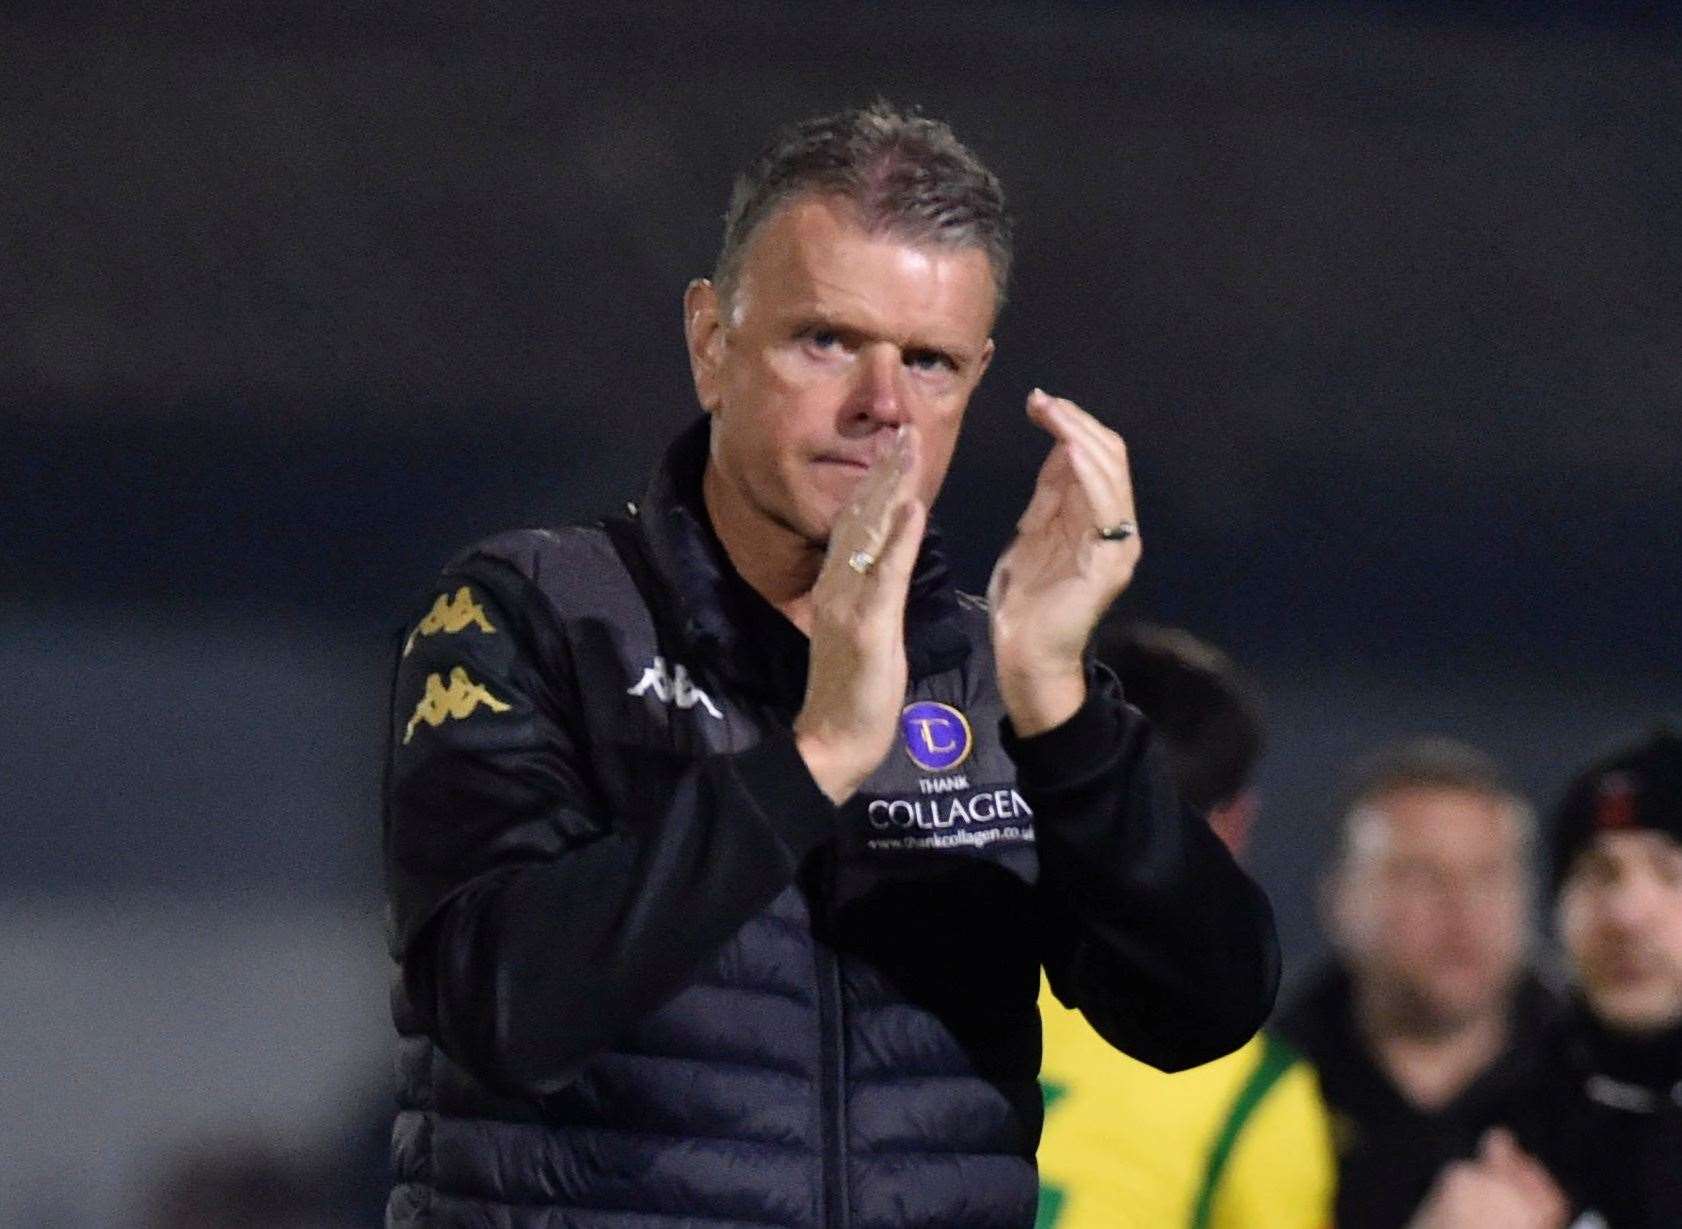 Dejected Faversham boss Tommy Warrilow applauds the fans after again suffering play-off heartache as they lost 4-1 on penalties on Tuesday night after a 2-2 draw. Picture: Ian Scammell